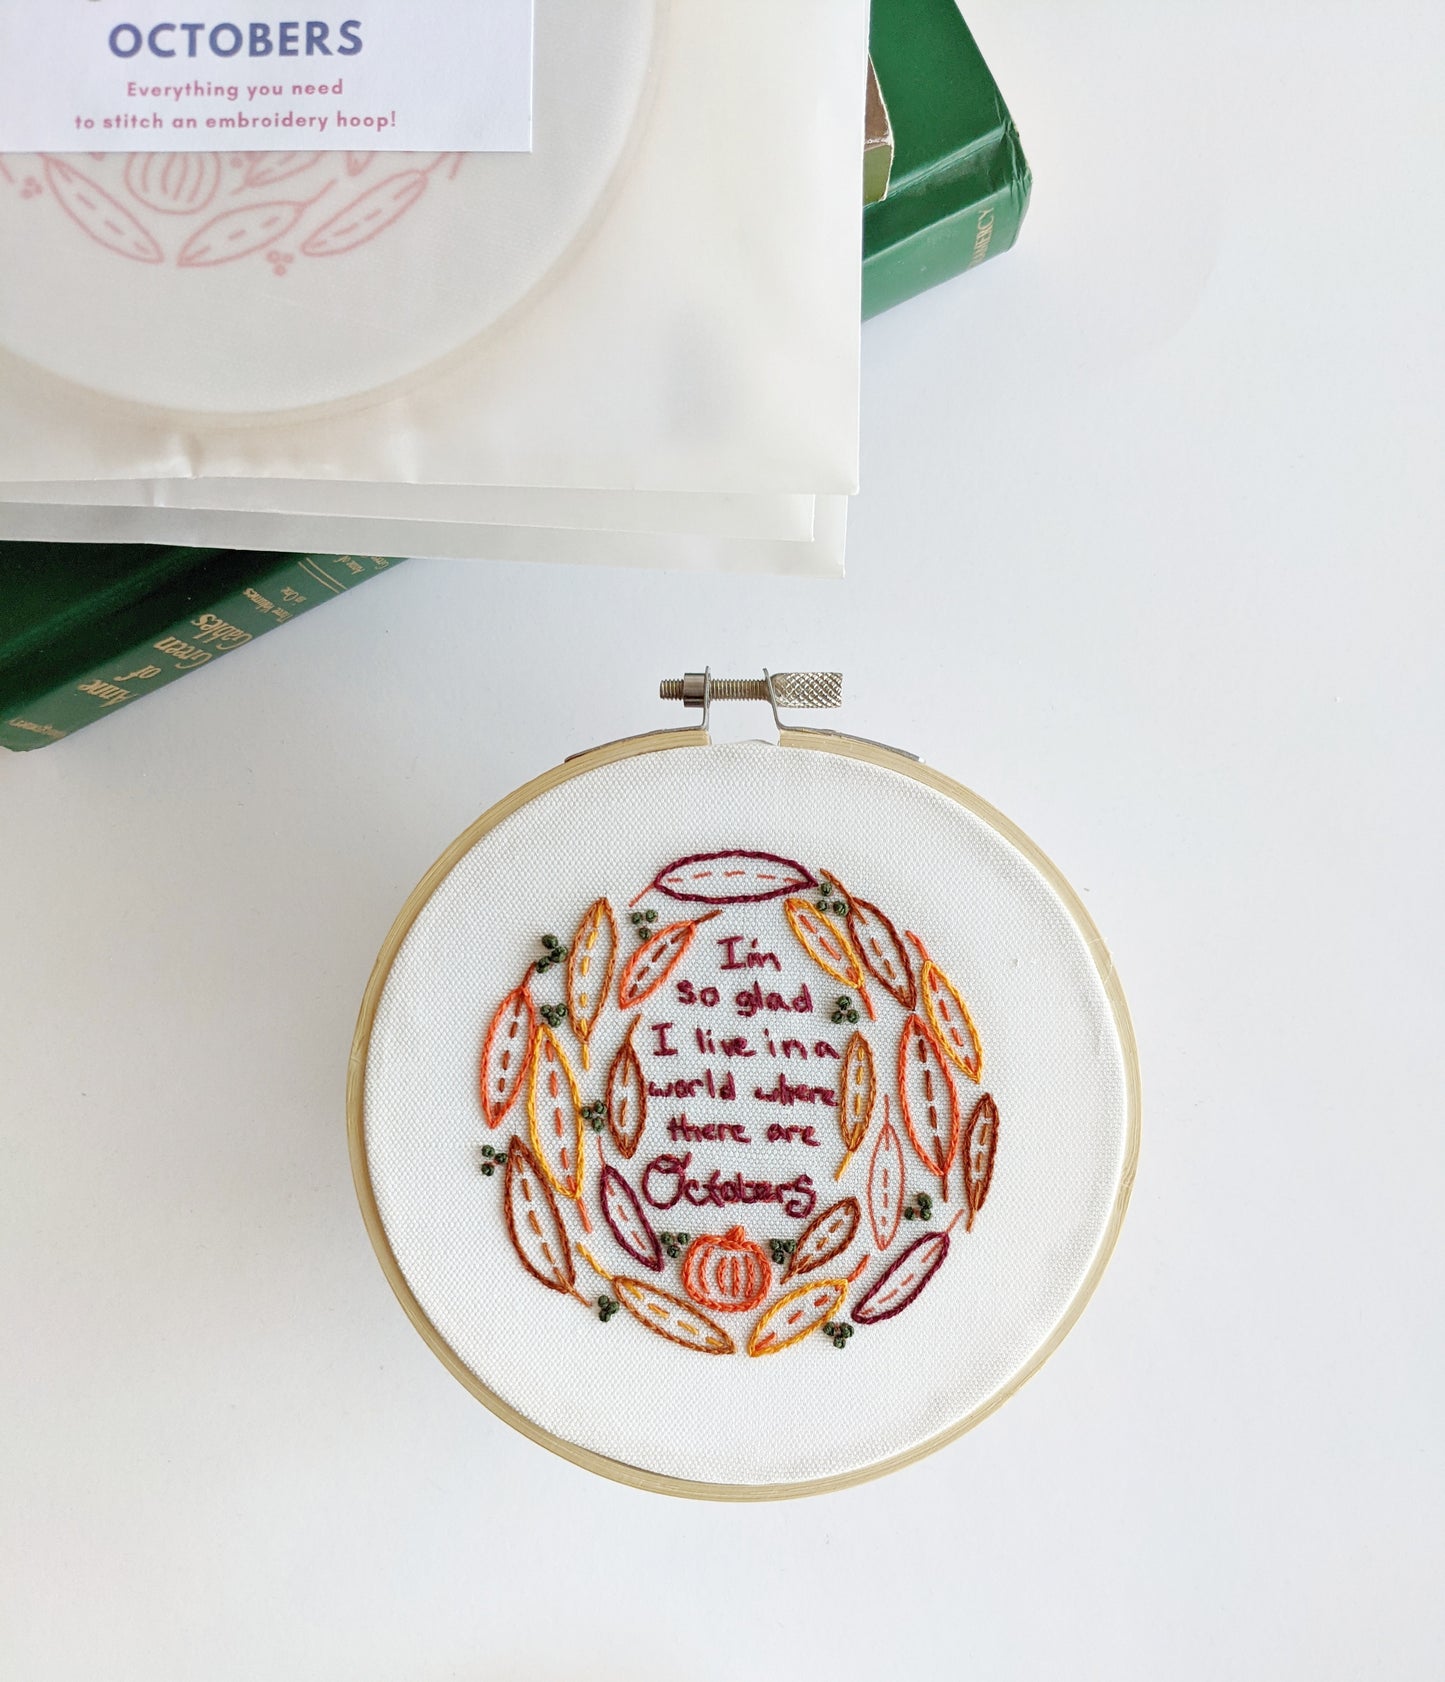 Octobers Embroidery Kit